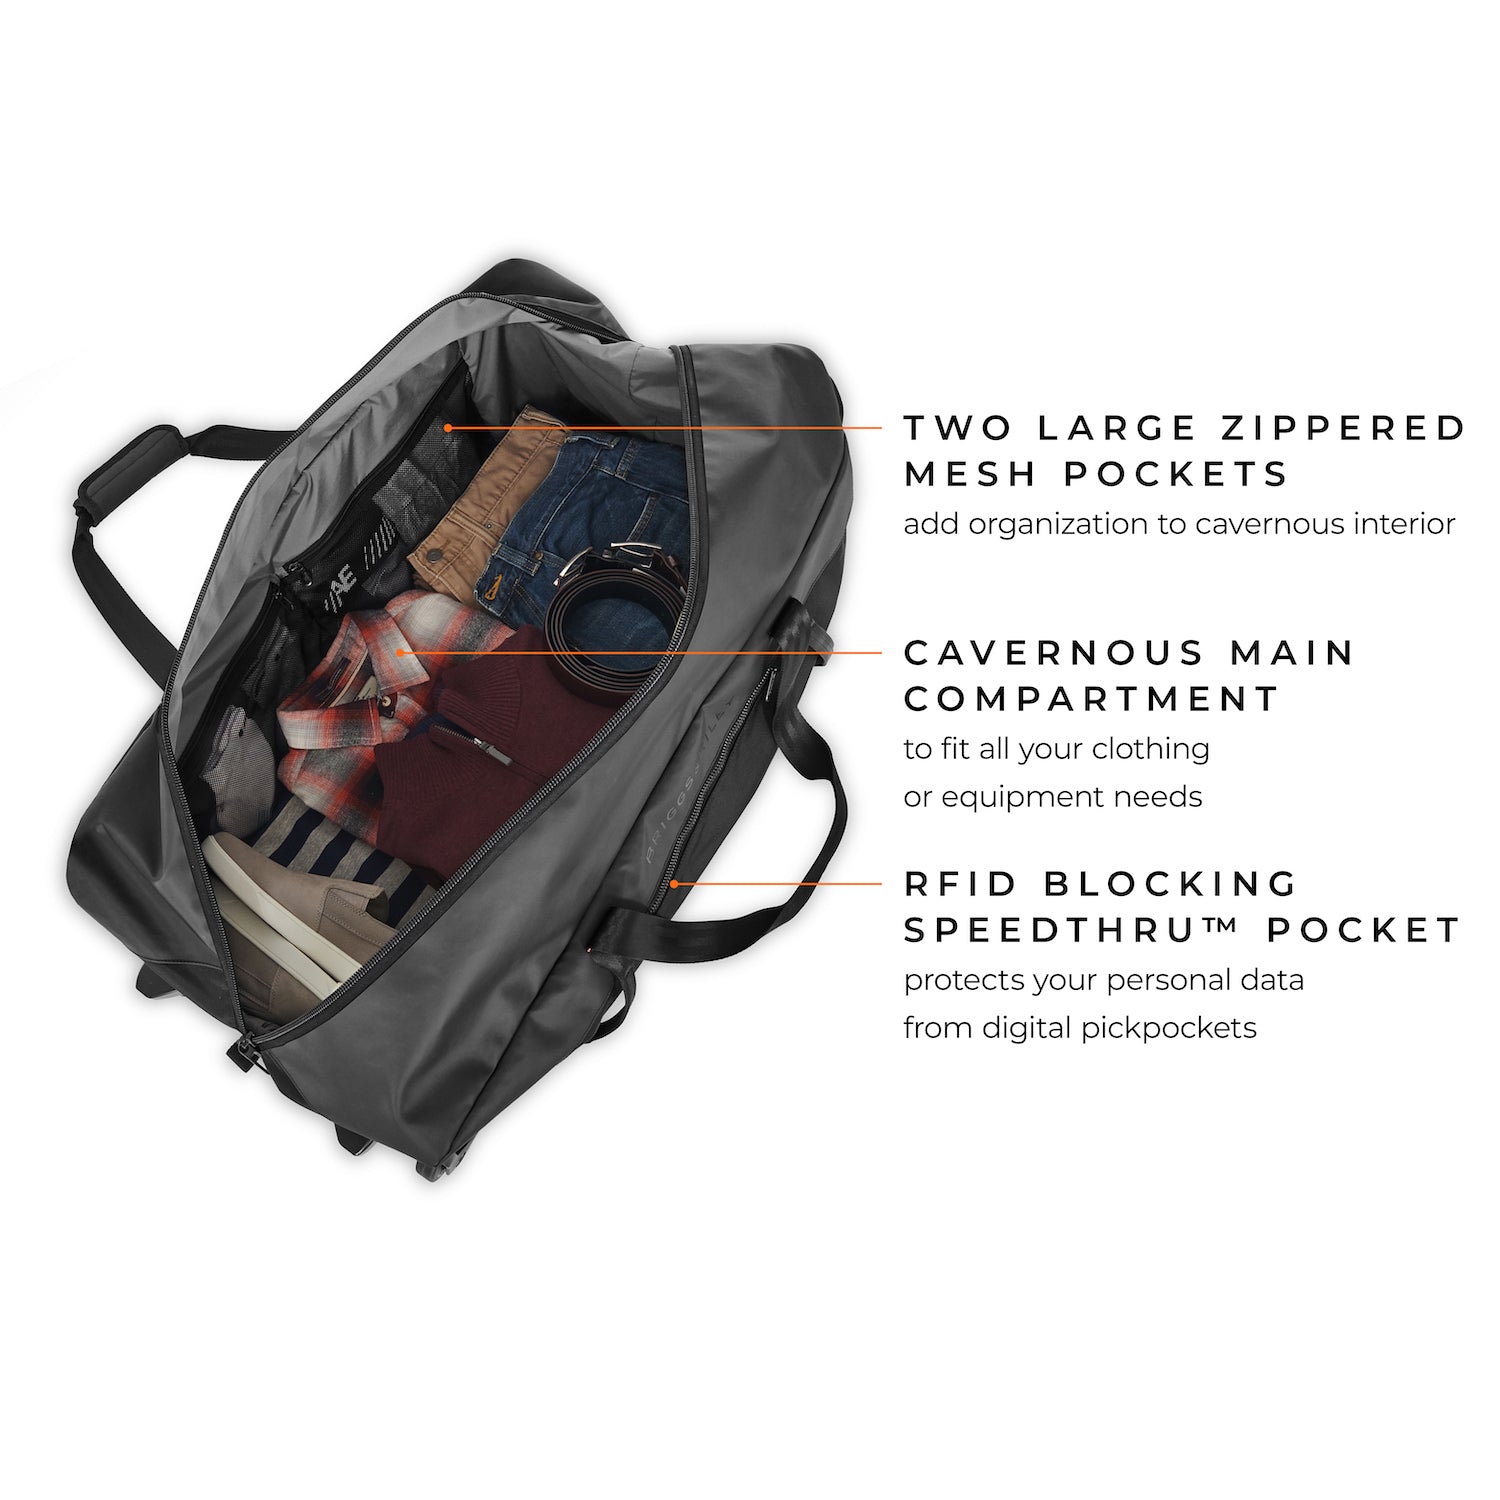 briggs & riley extra large rolling duffle two large zippered mesh pockets add organization to cavernous interior, canvernouse main compartment to fit all your clothing or equipment needs, rfid blocking speedthru pocket protects your personal data from digital pickpockets   #color_black